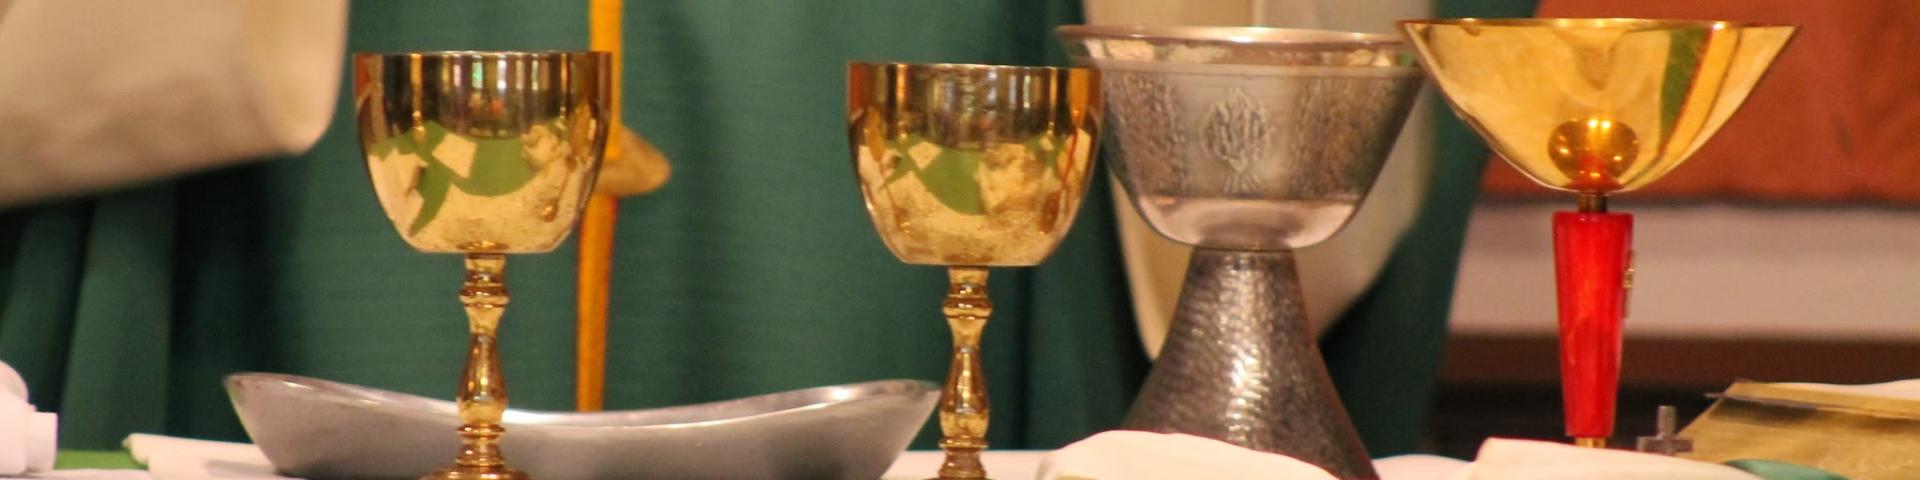 Picture of chalices during consecration